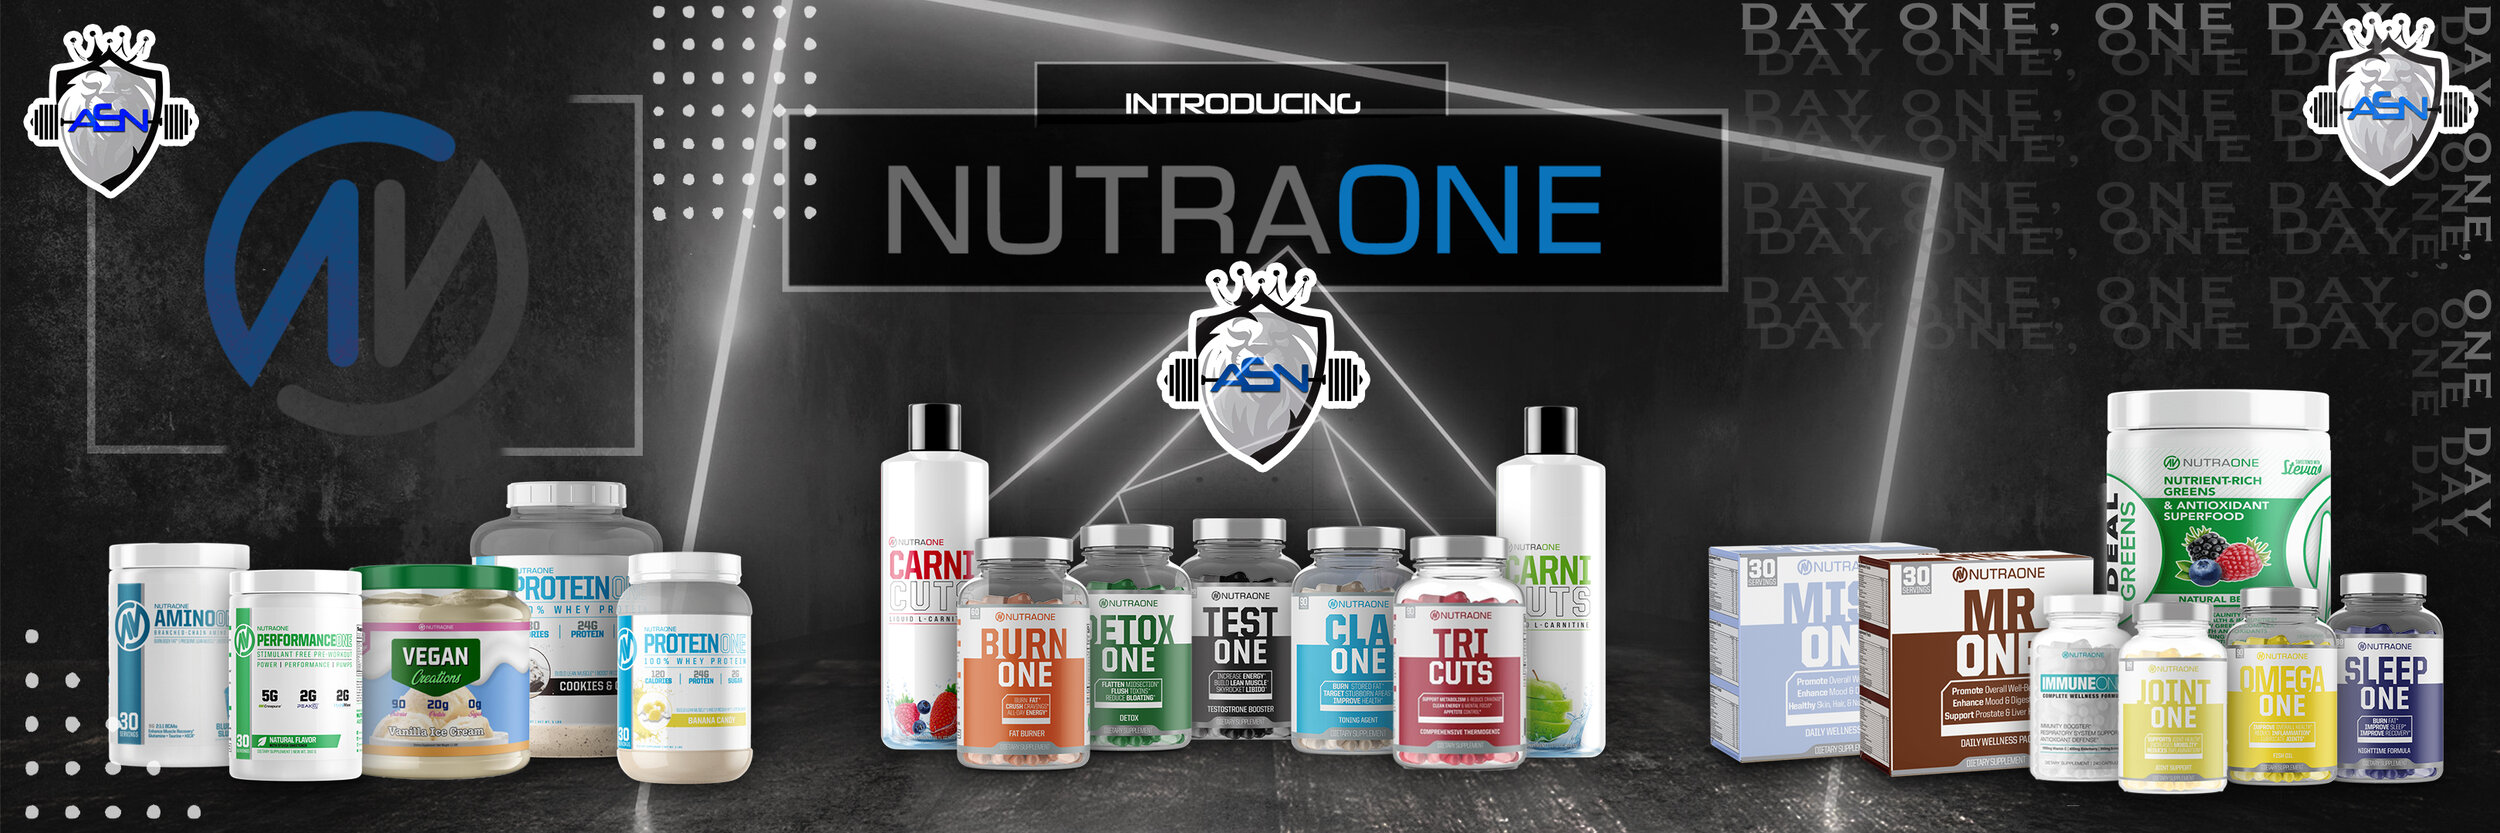 nutraone product launch.jpg